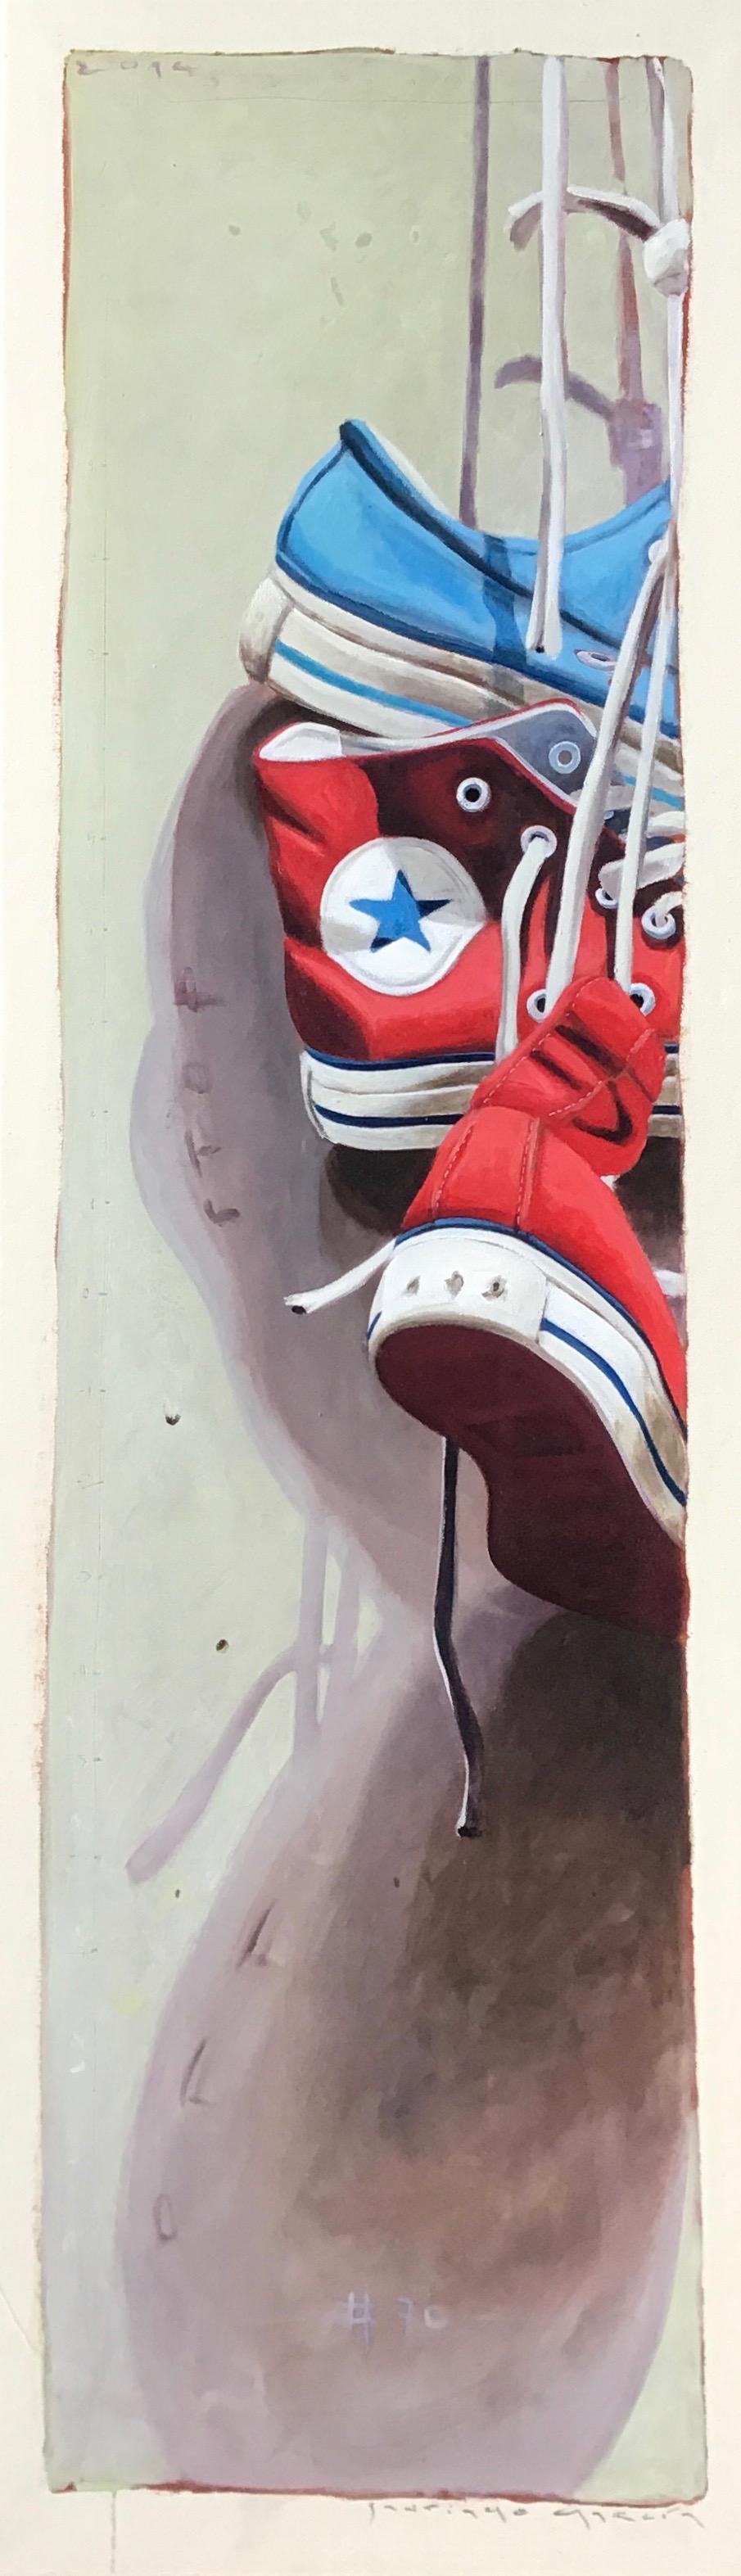 Santiago Garcia Still-Life Painting - "Converse #70" Detailed Vertical Painting of Red and Blue Chuck Taylors